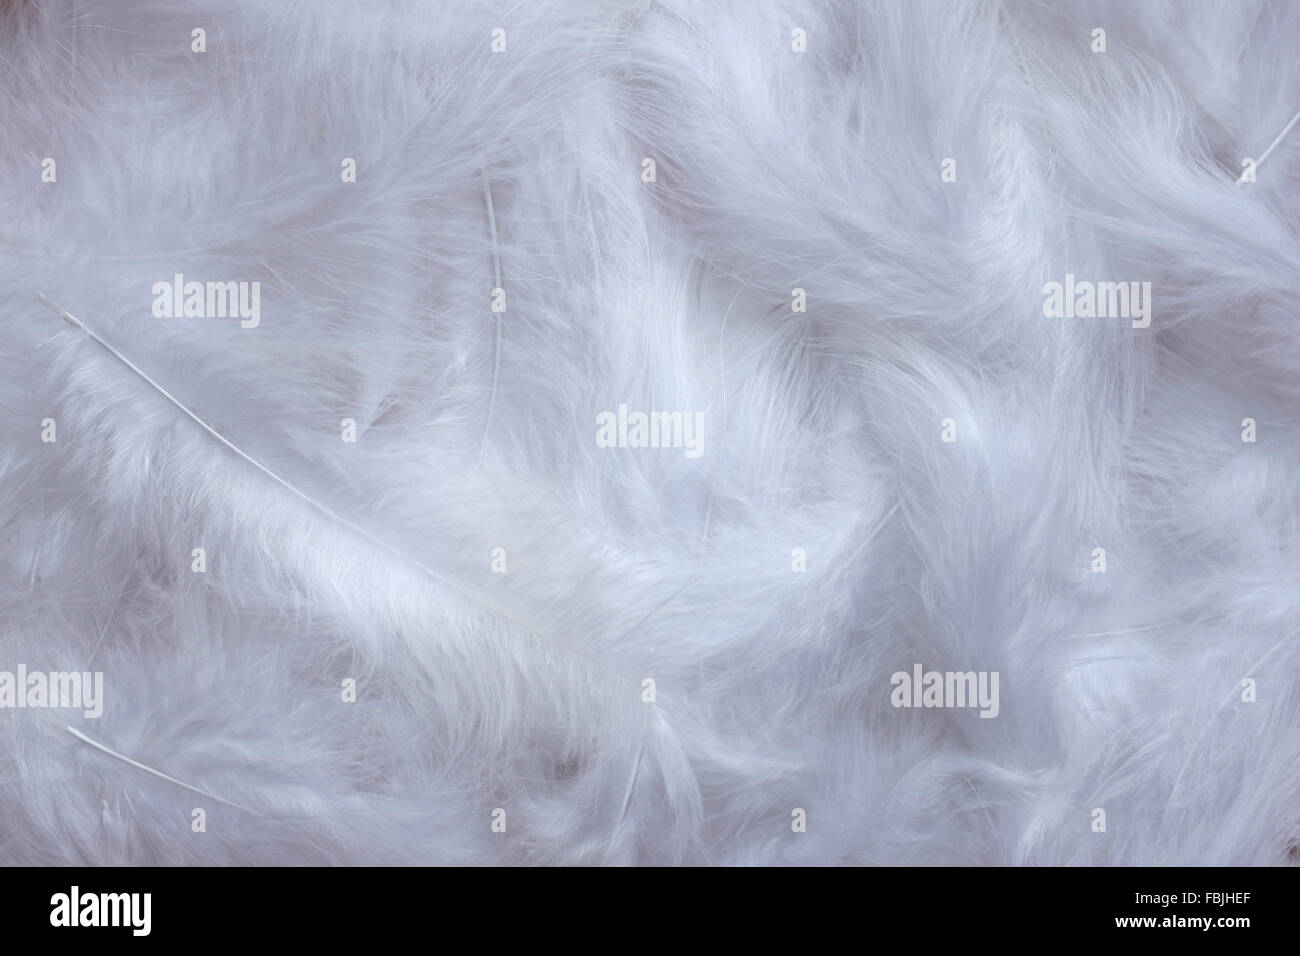 Soft white marabou feathers as an abstract background texture Stock Photo